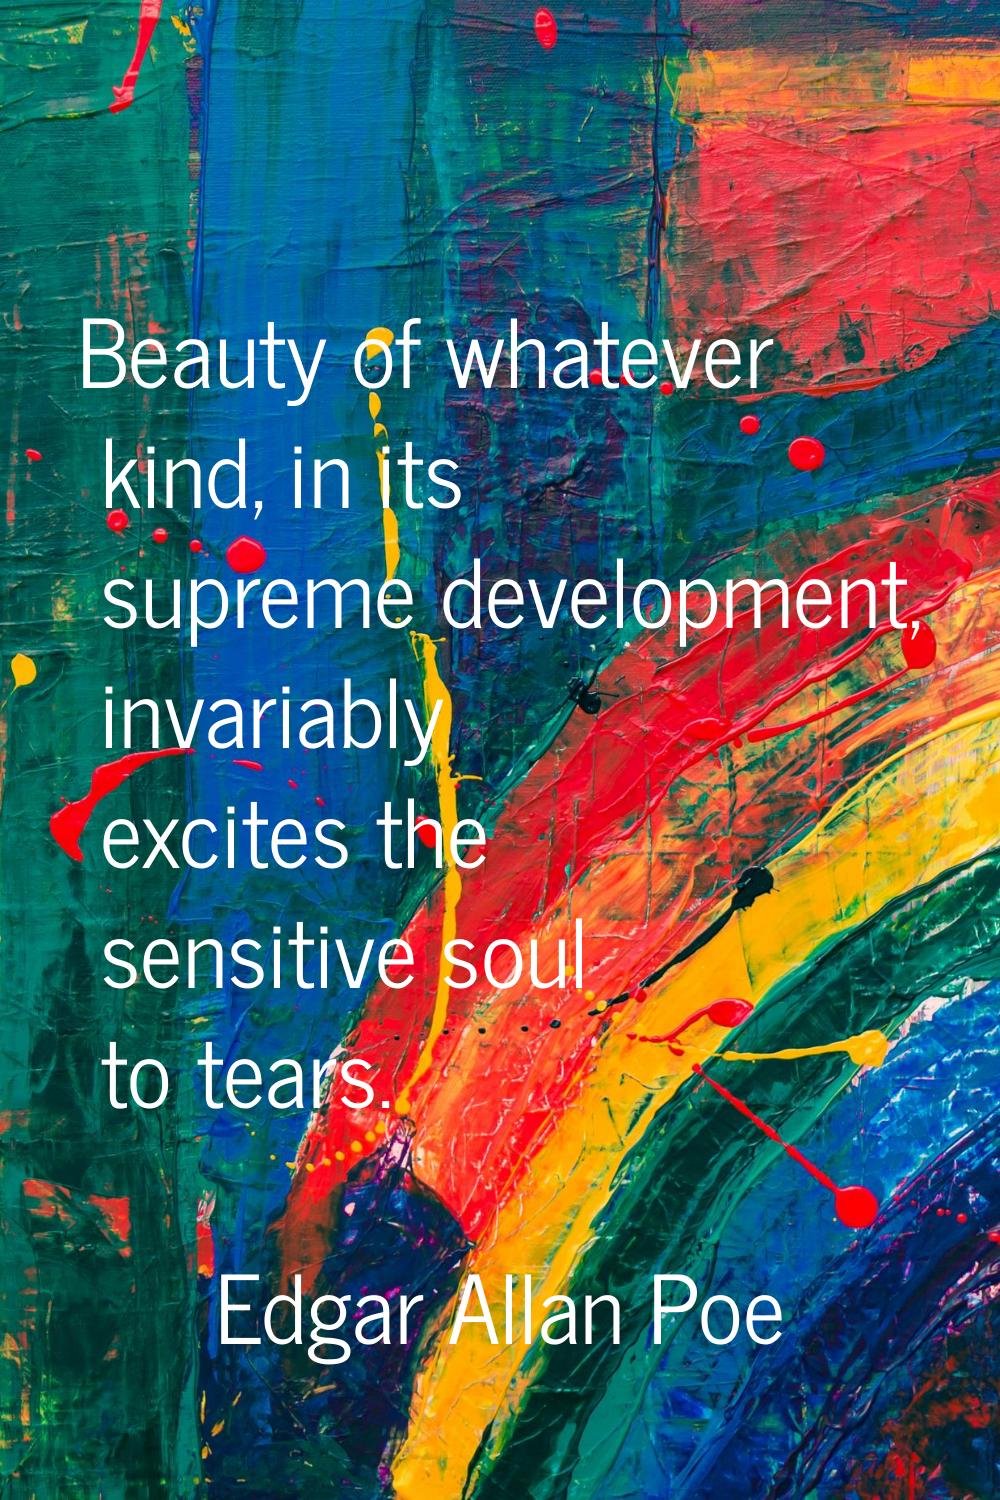 Beauty of whatever kind, in its supreme development, invariably excites the sensitive soul to tears